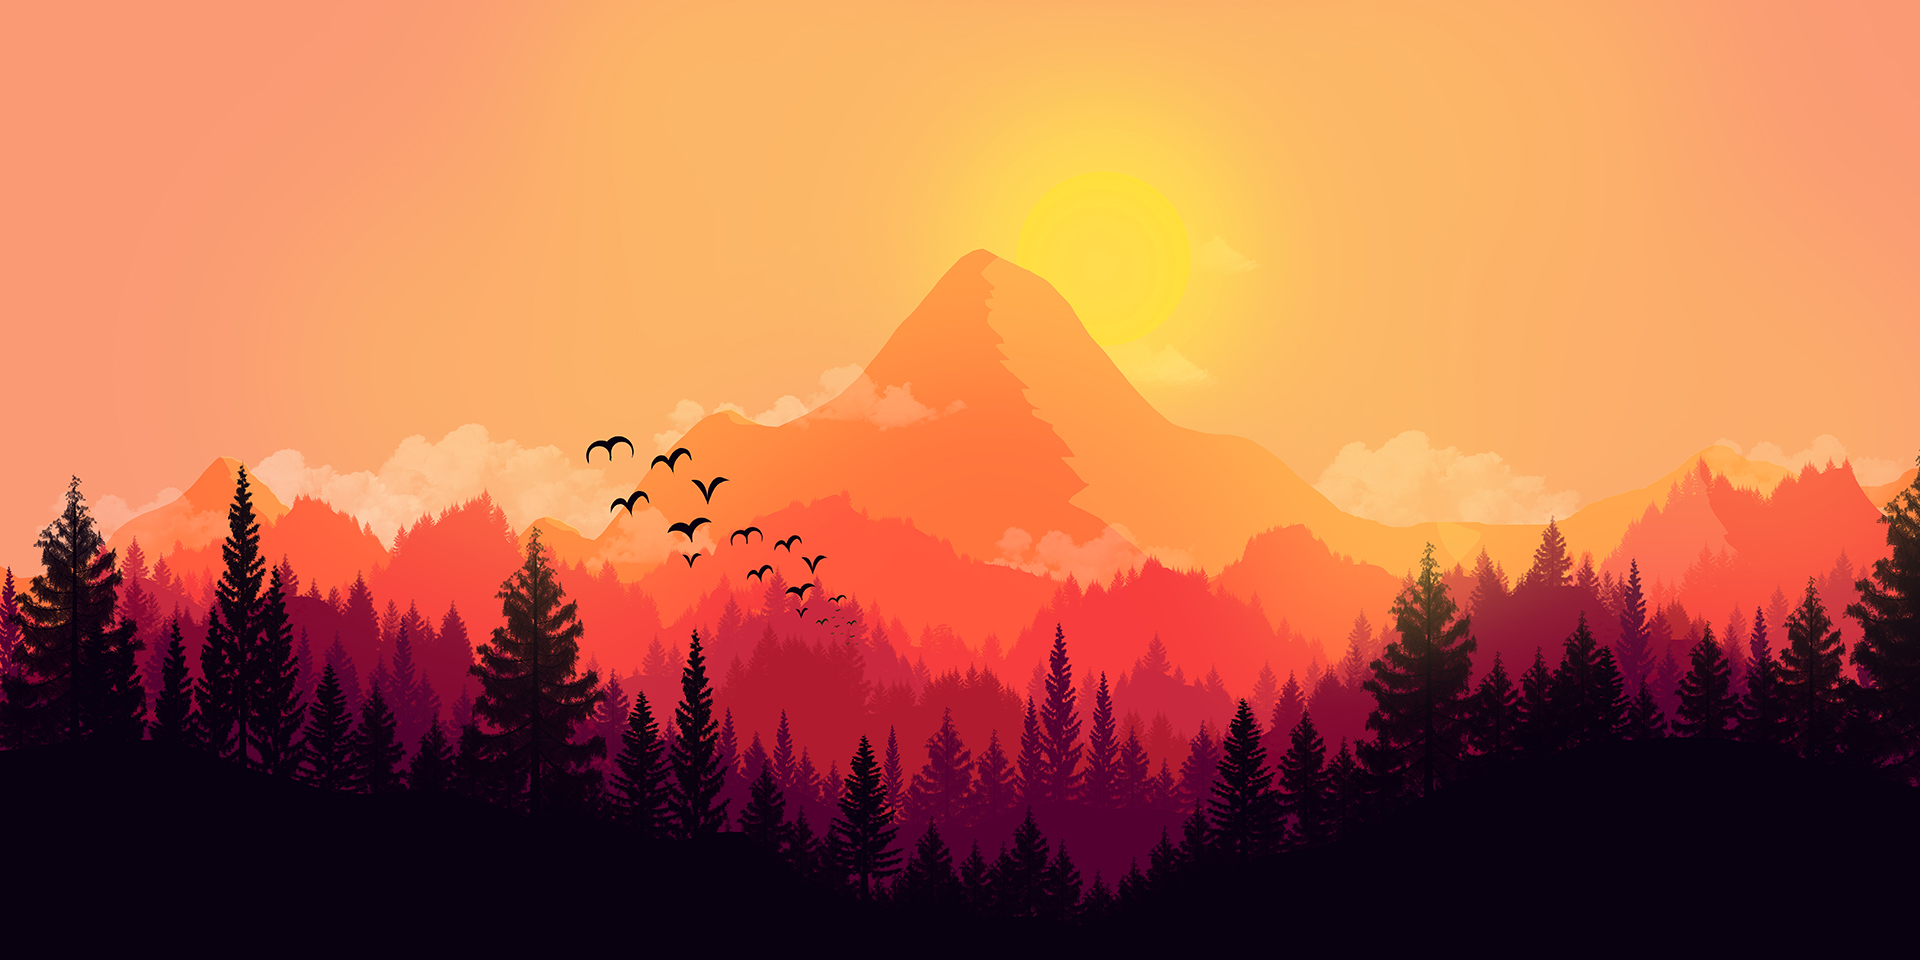 Illustration with trees in foreground and birds flying over a pastel backdrop of a mountain during a sunset or pinks, oranges and reds